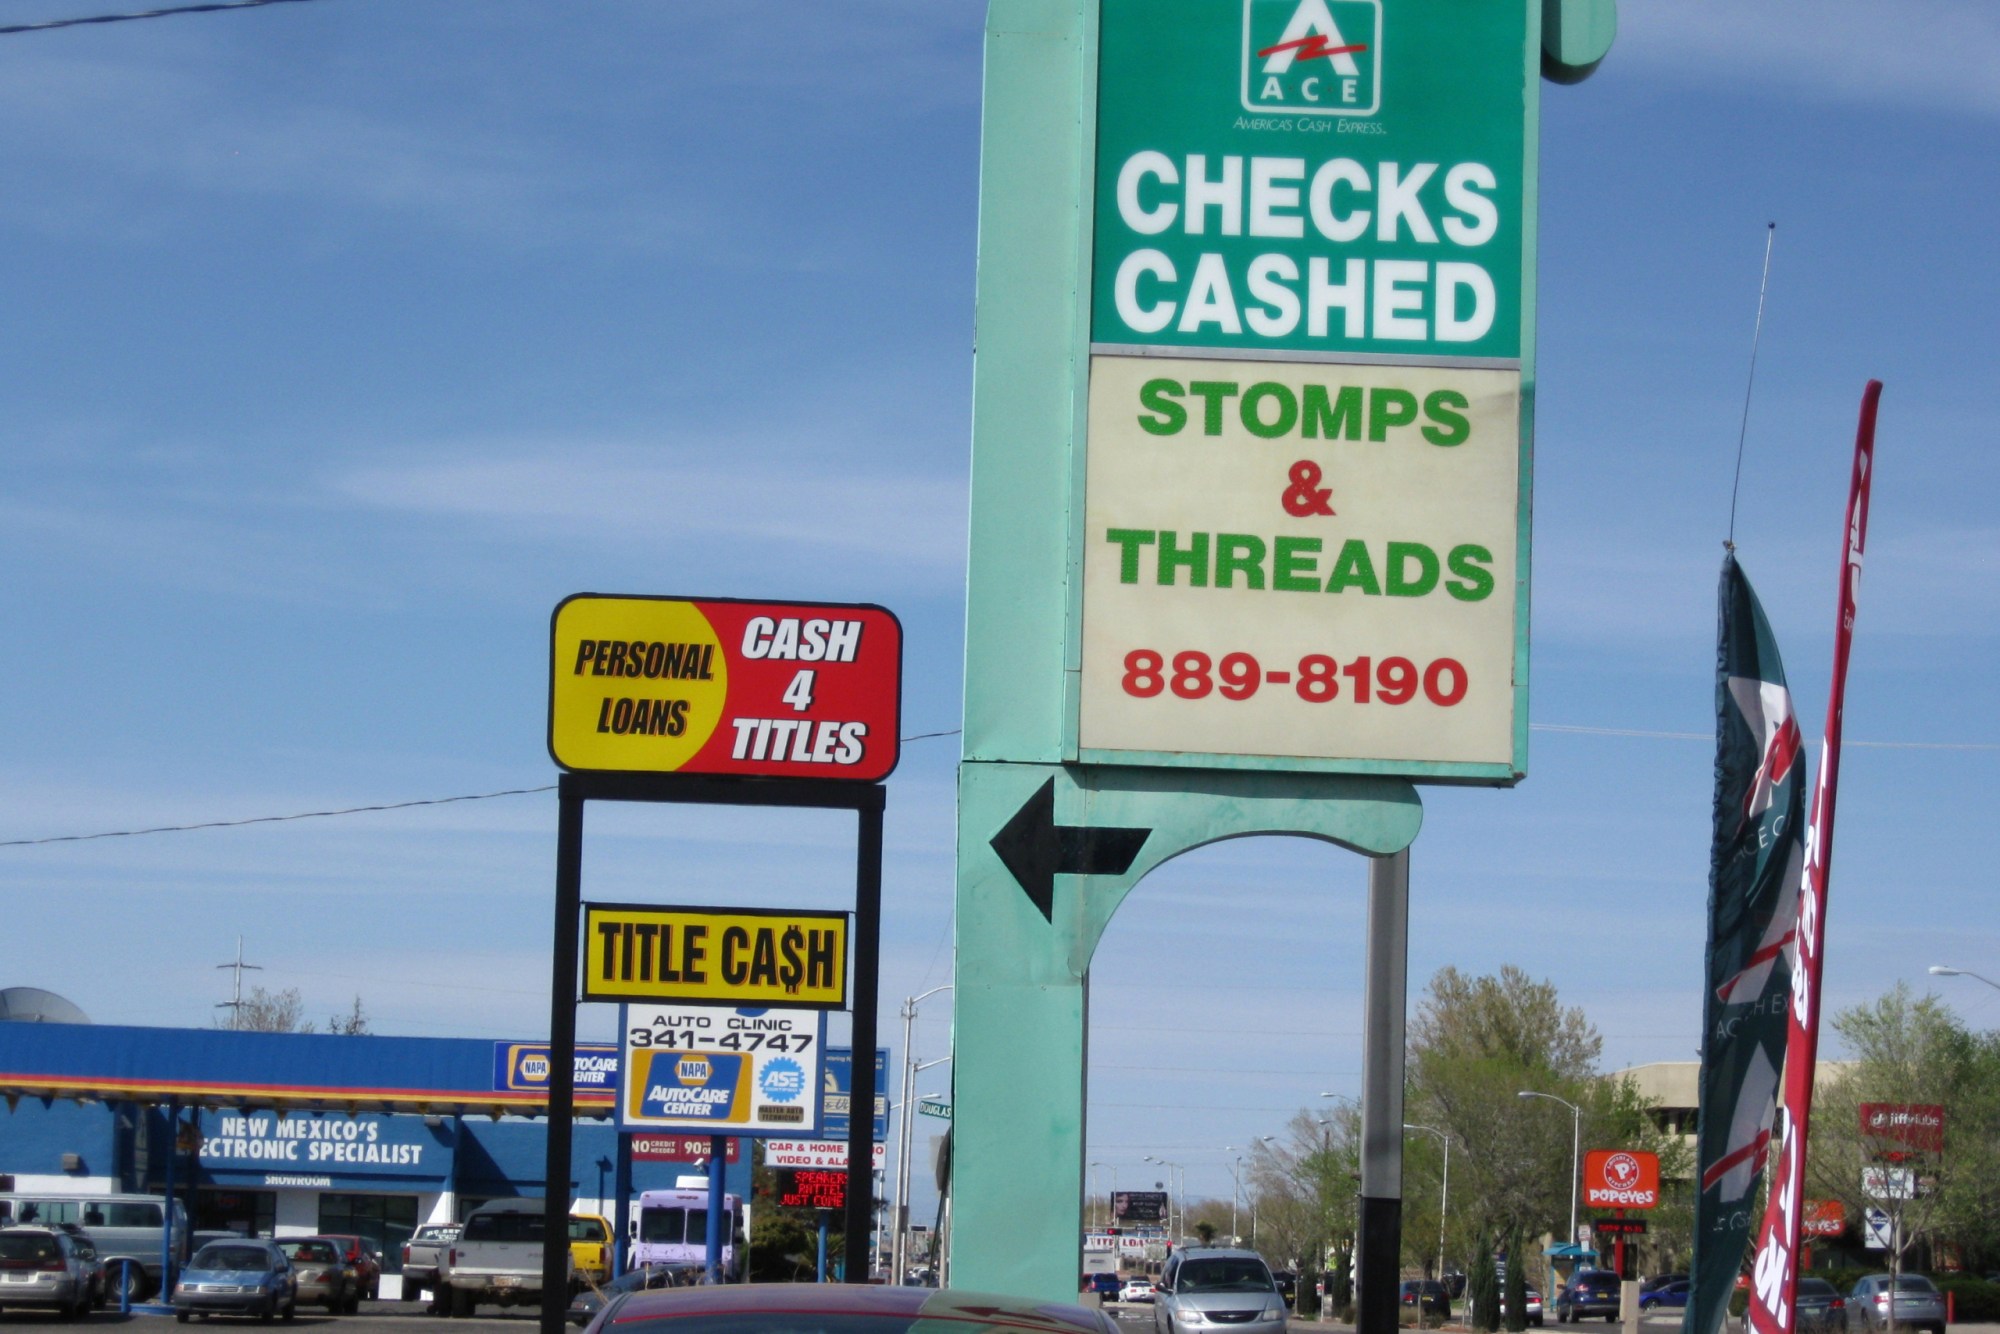 Shown is an ACE Cash Express outlet on San Mateo Boulevard in Albuquerque, New Mexico, April 2015. (AP/Vik Jolly)